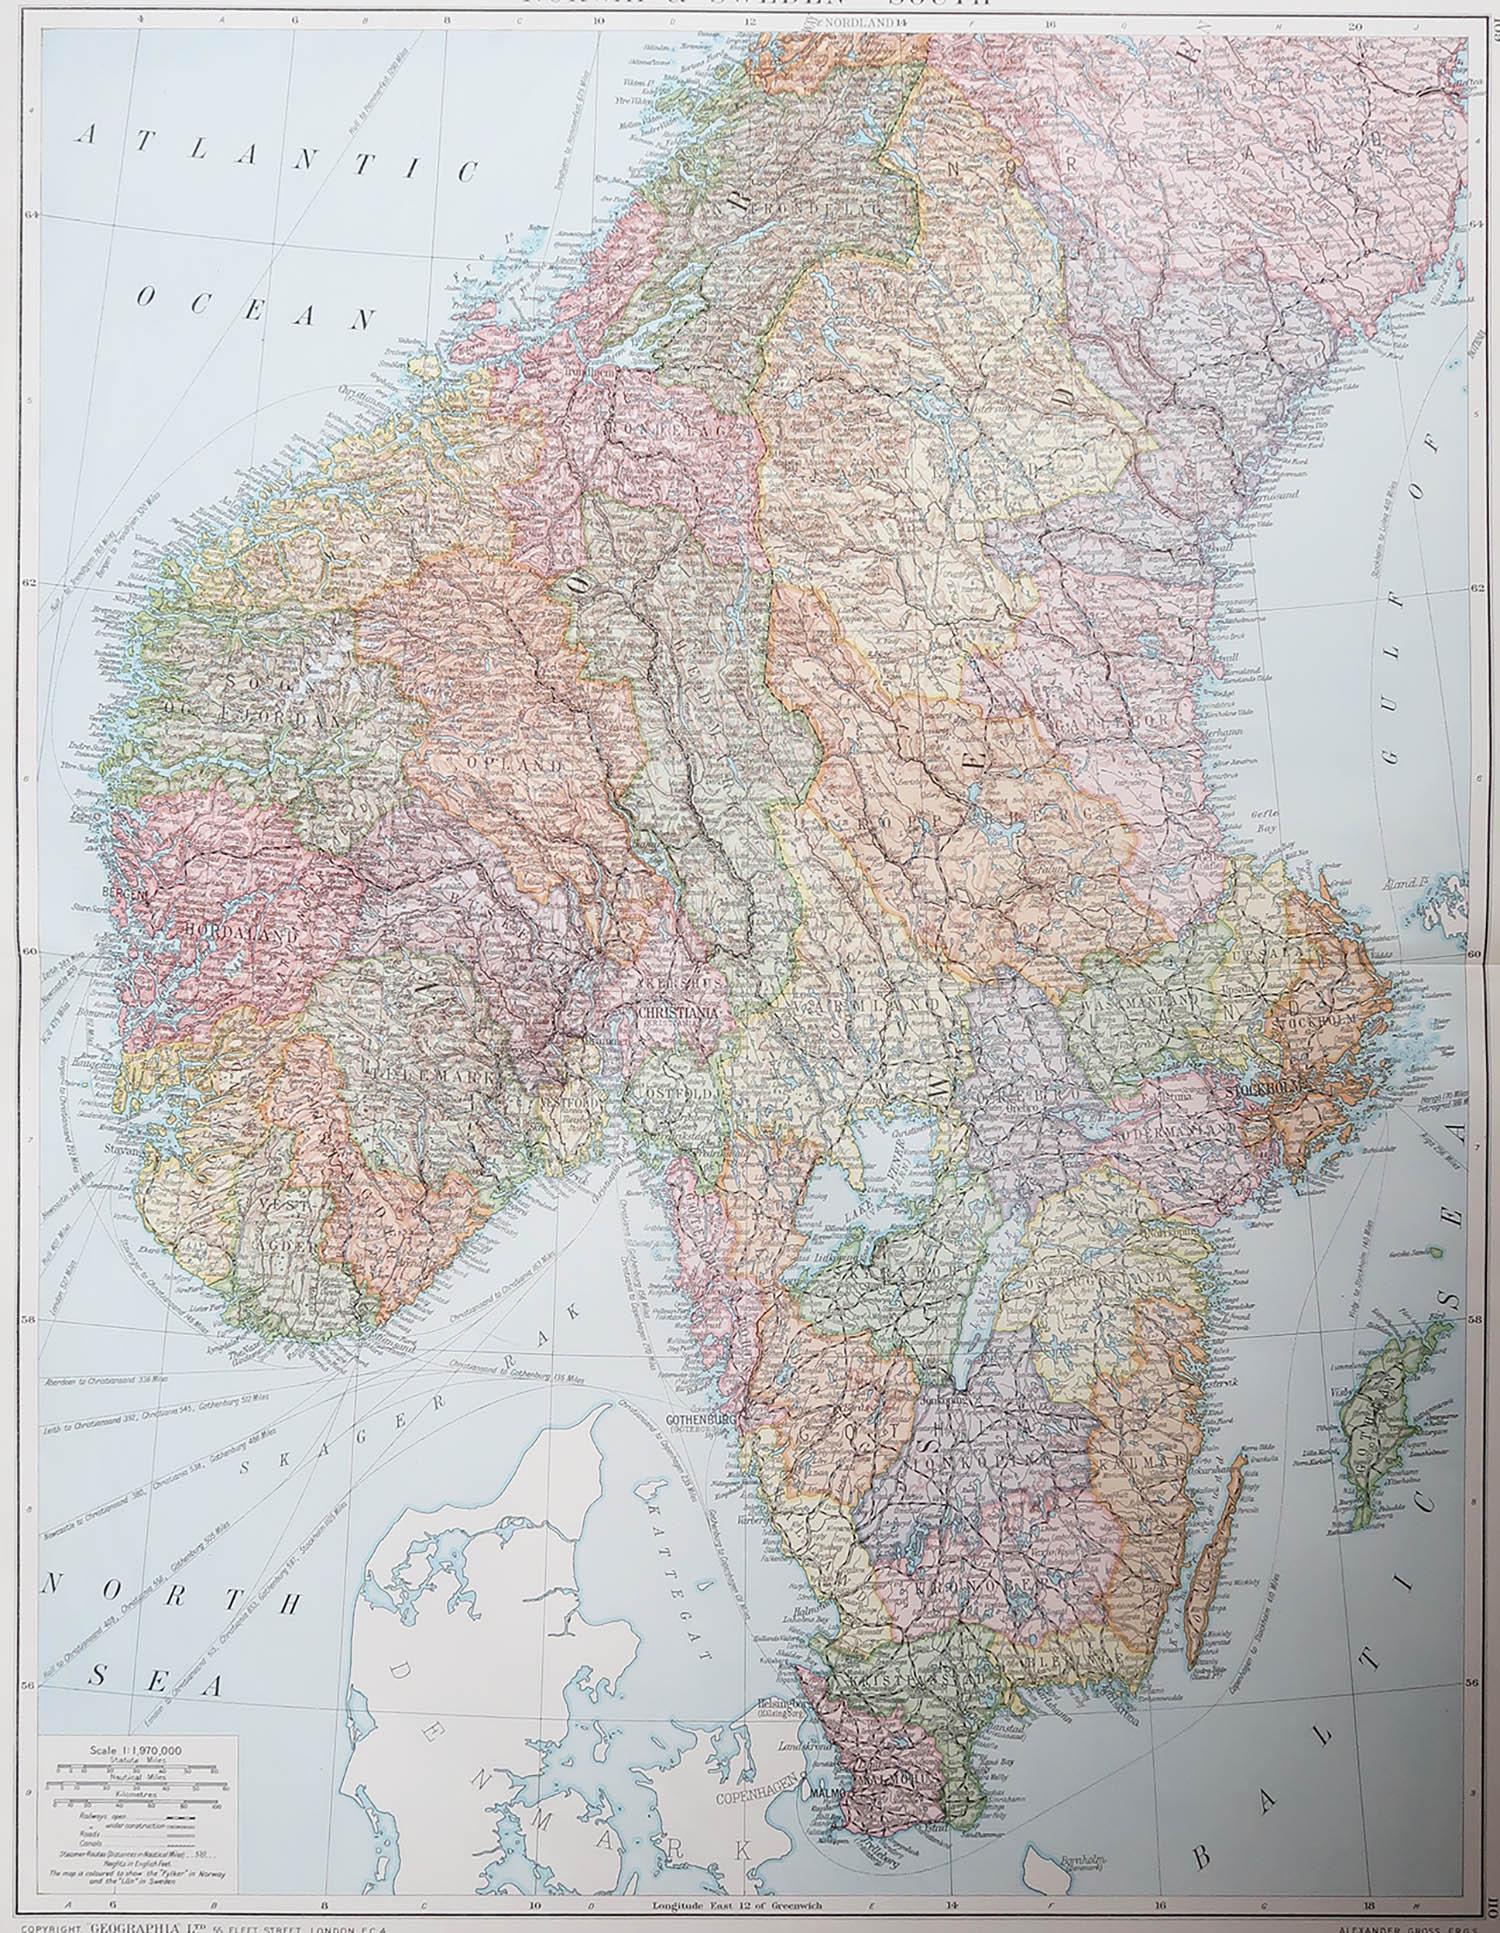 Great map of Sweden and Norway

Original color. Good condition

Published by Alexander Gross

Unframed.








